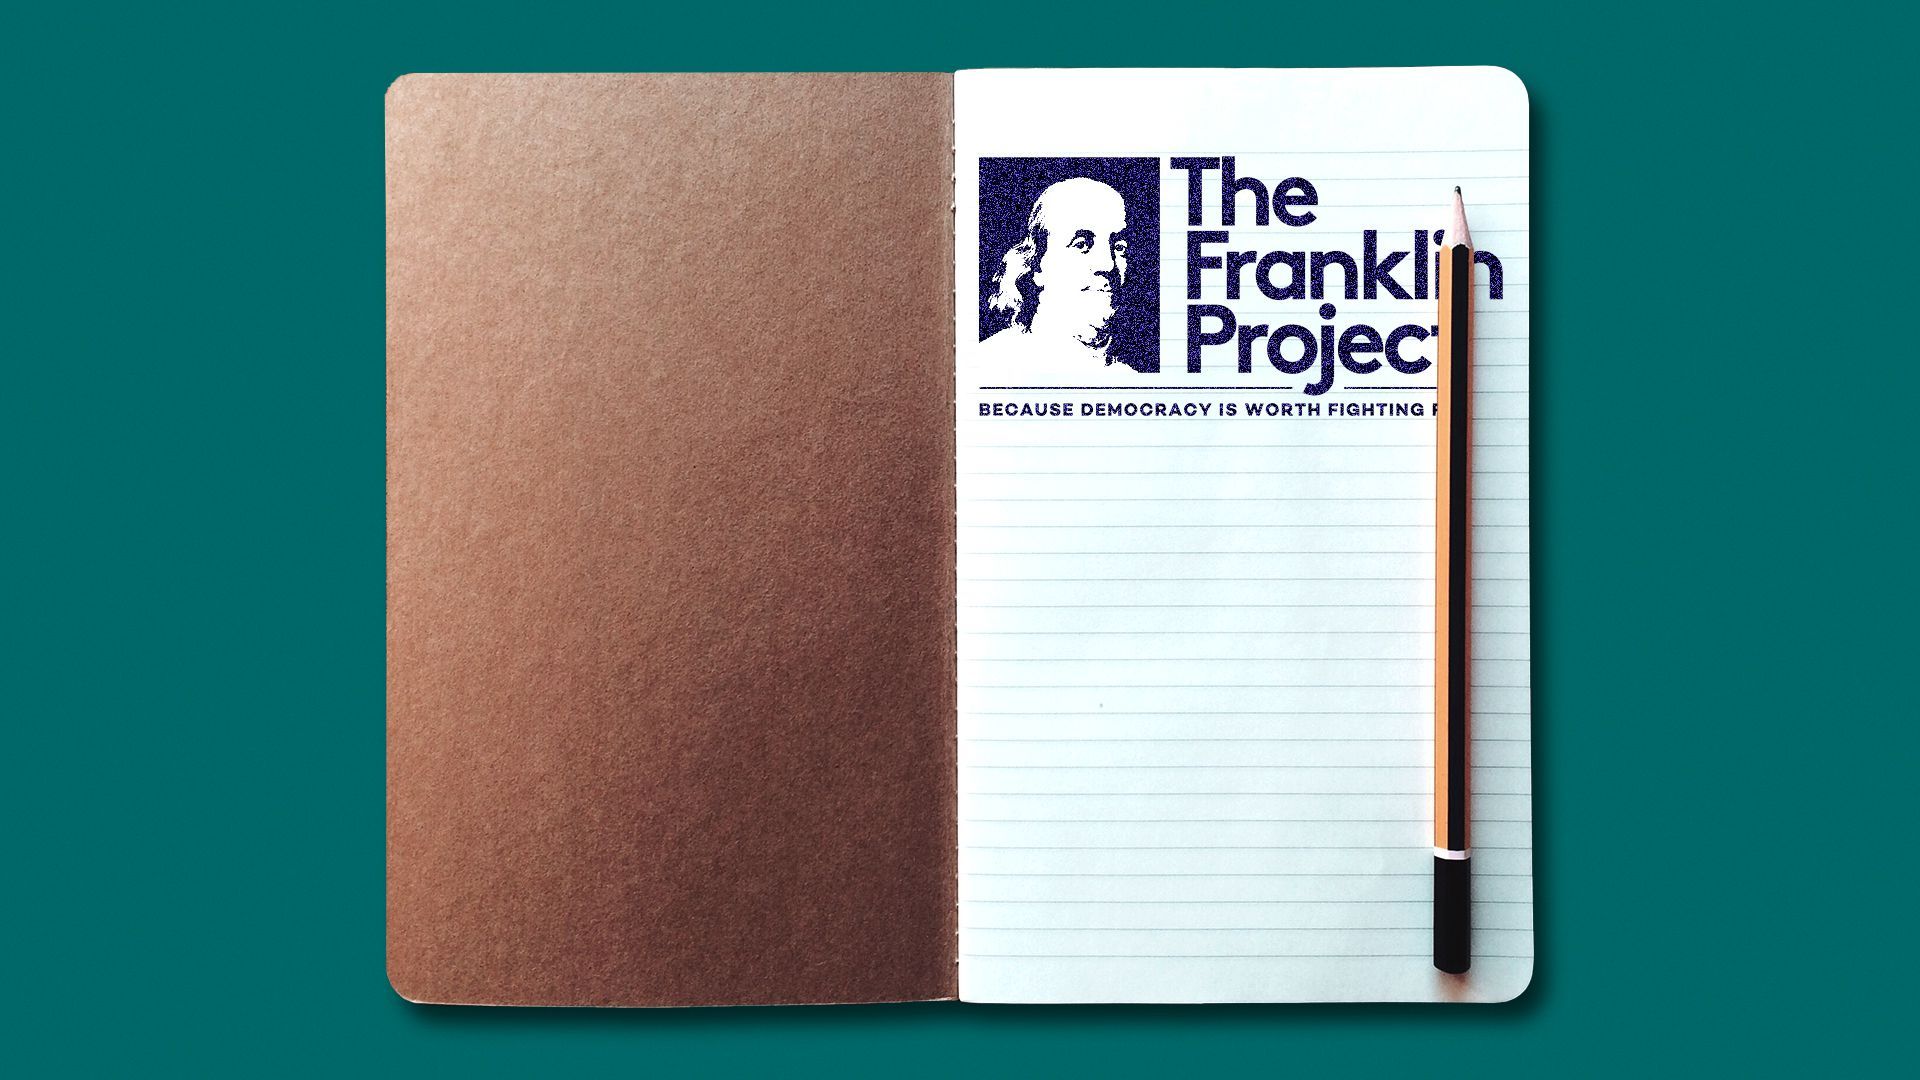 Illustration of pencil on an open notebook with The Franklin Project logo drawn inside